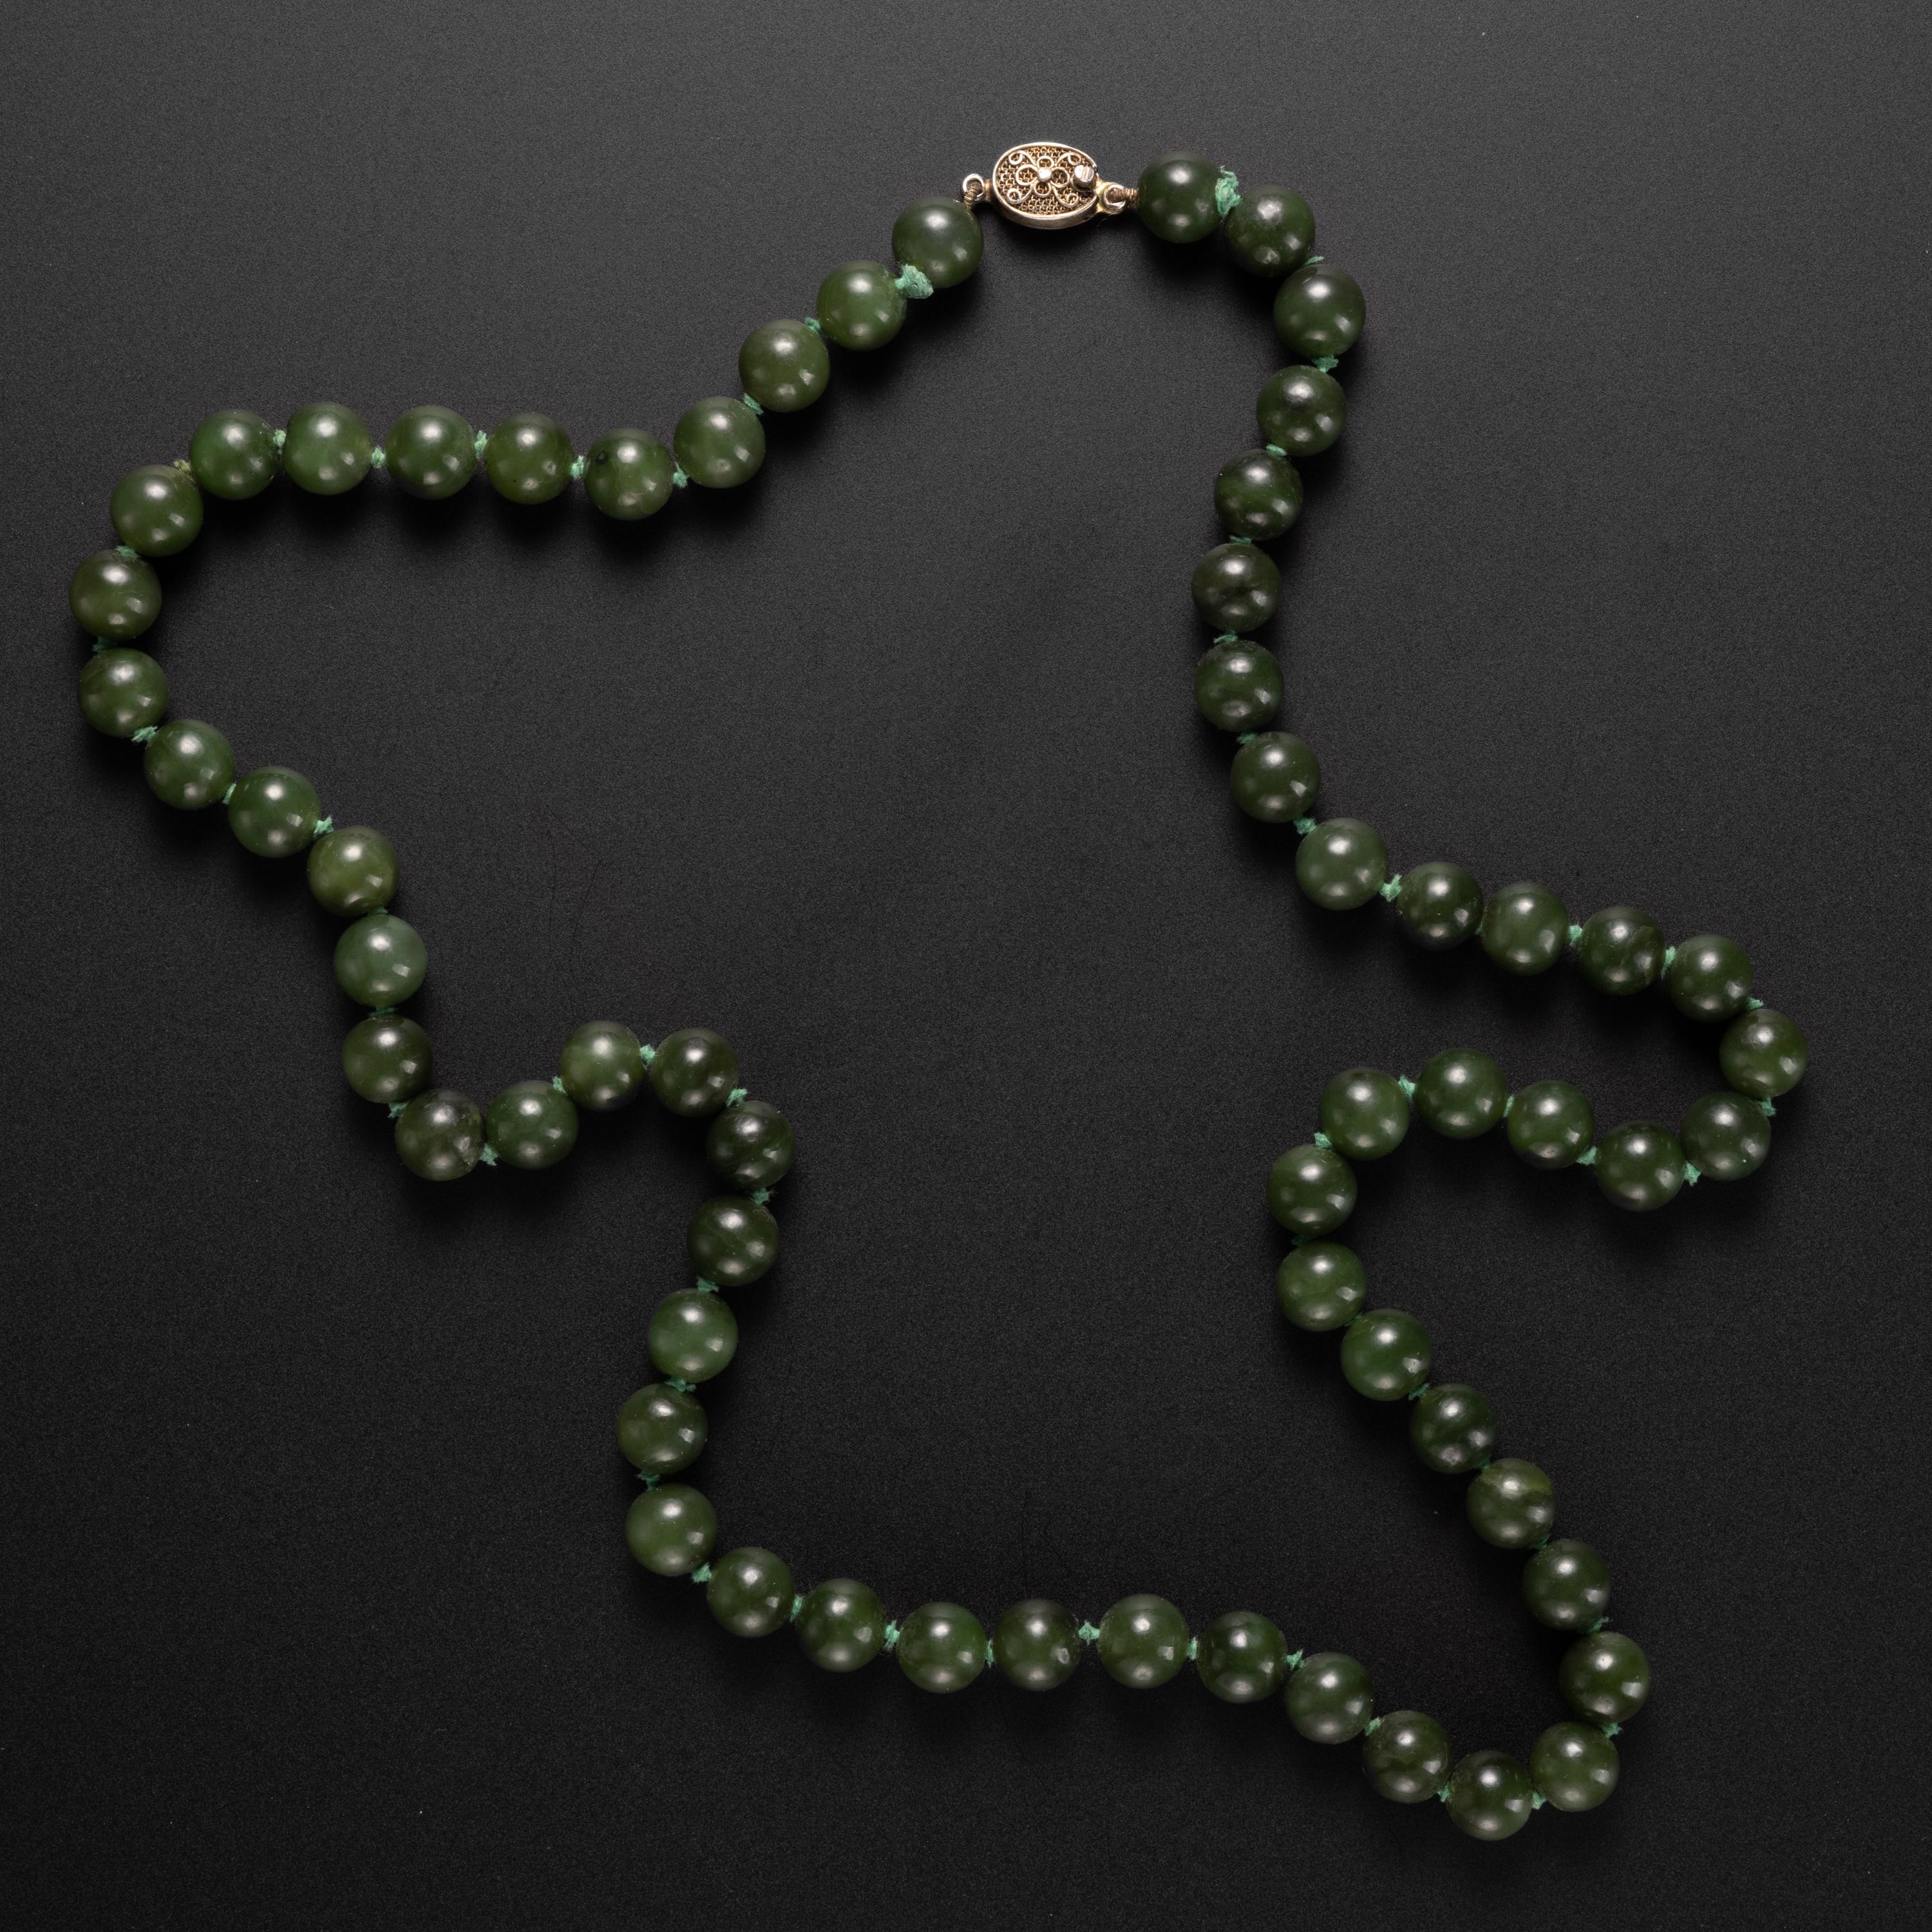 The hand-carved nephrite jade beads that compose this necklace are a deep olive green with a bright luster. The 62 beads measure between 9.93 - 10.31mm. The overall length is just shy of 28